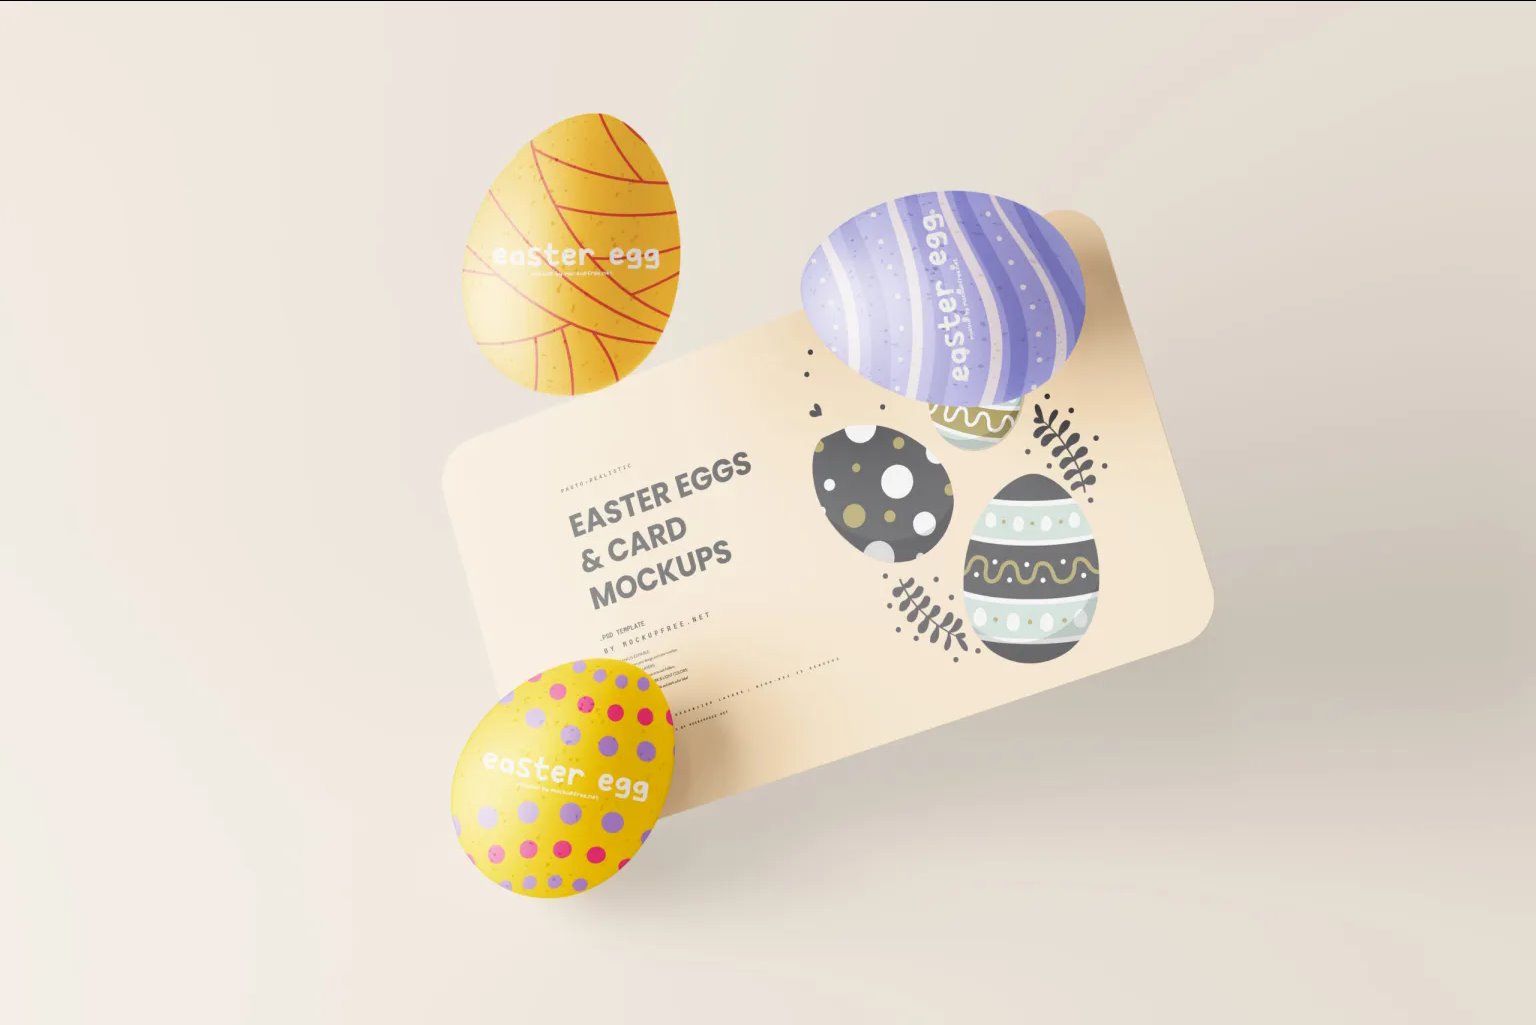 8 Card Mockups with Easter Eggs in Varied Sights FREE PSD